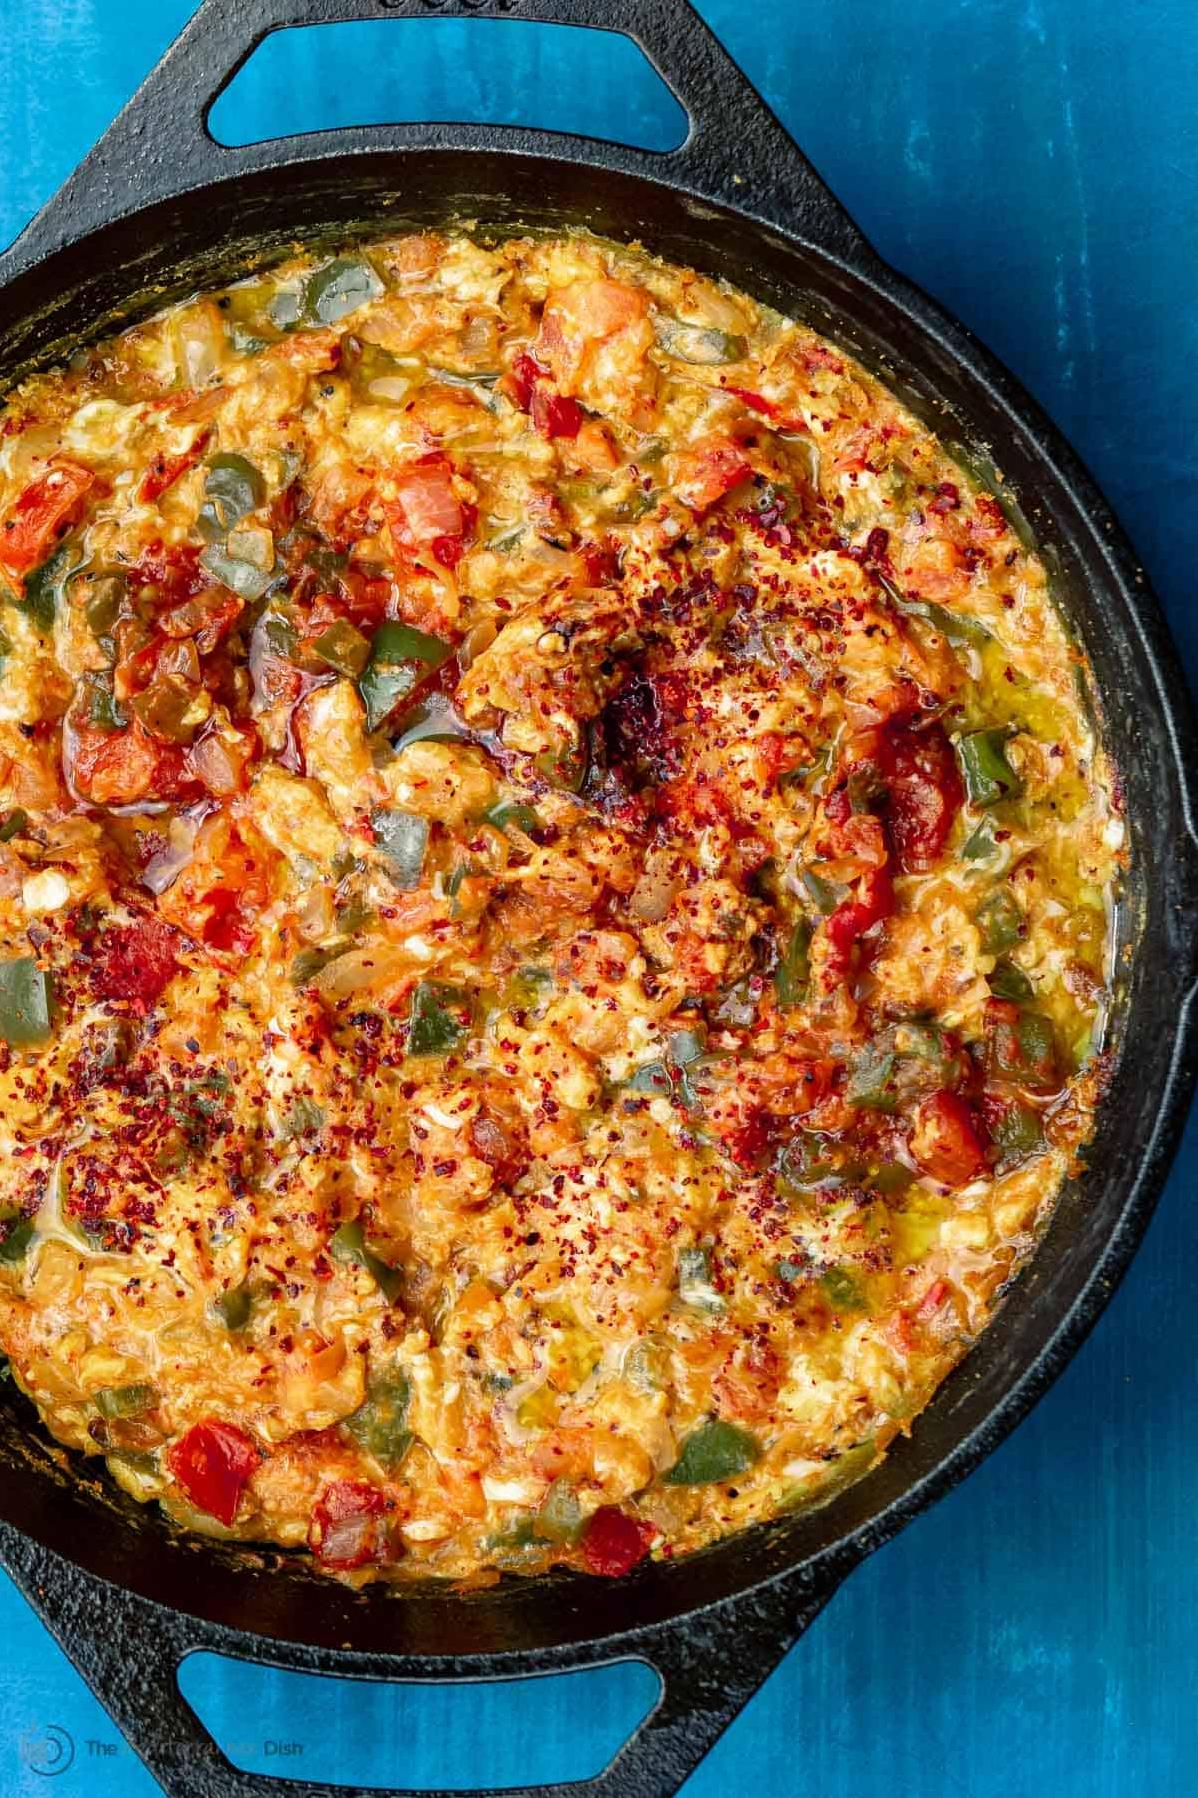  It's time to switch up your breakfast routine with this Menhaden omelette.